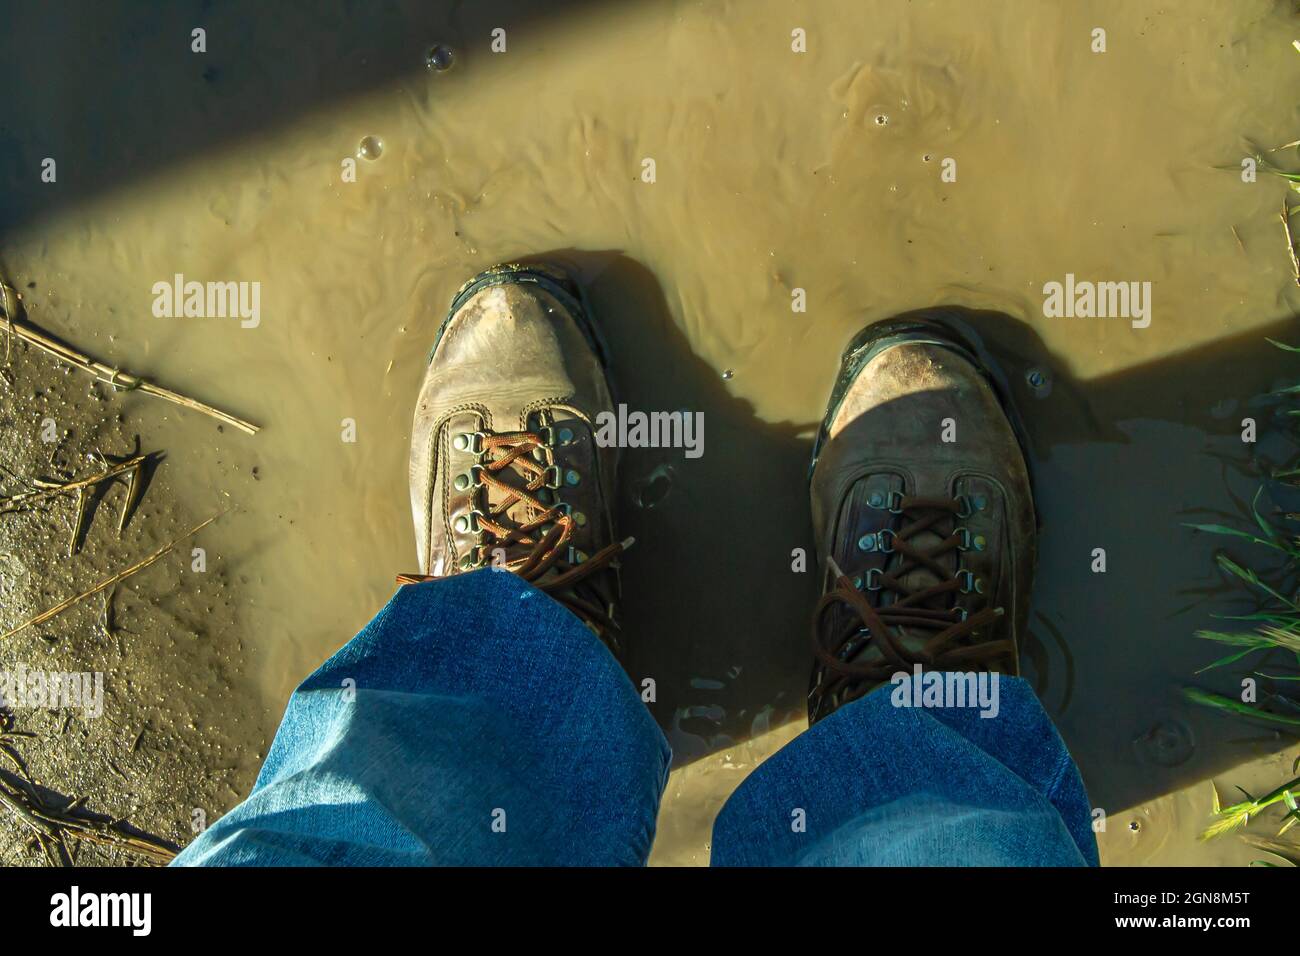 Hiking boots on trail in muddy water Royalty free stock photo Stock Photo